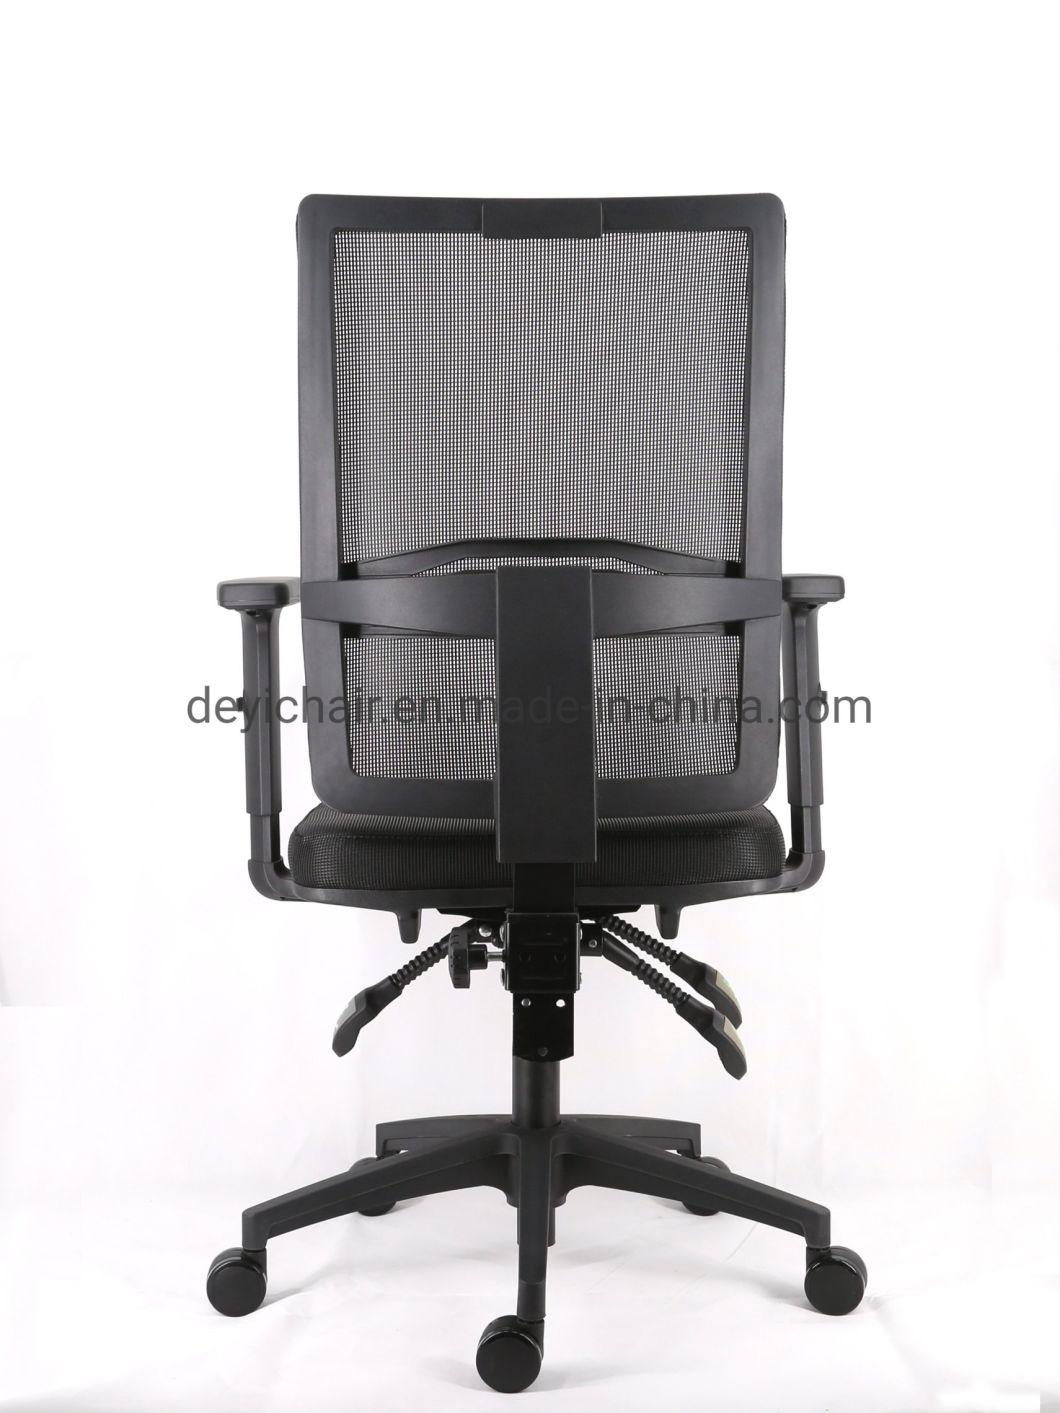 3 Lever Light Duty Mechanism Nylon Base with PU Castor Class 4 Gas Lift Mesh Upholstery Adjustable Arms Fabric Chair